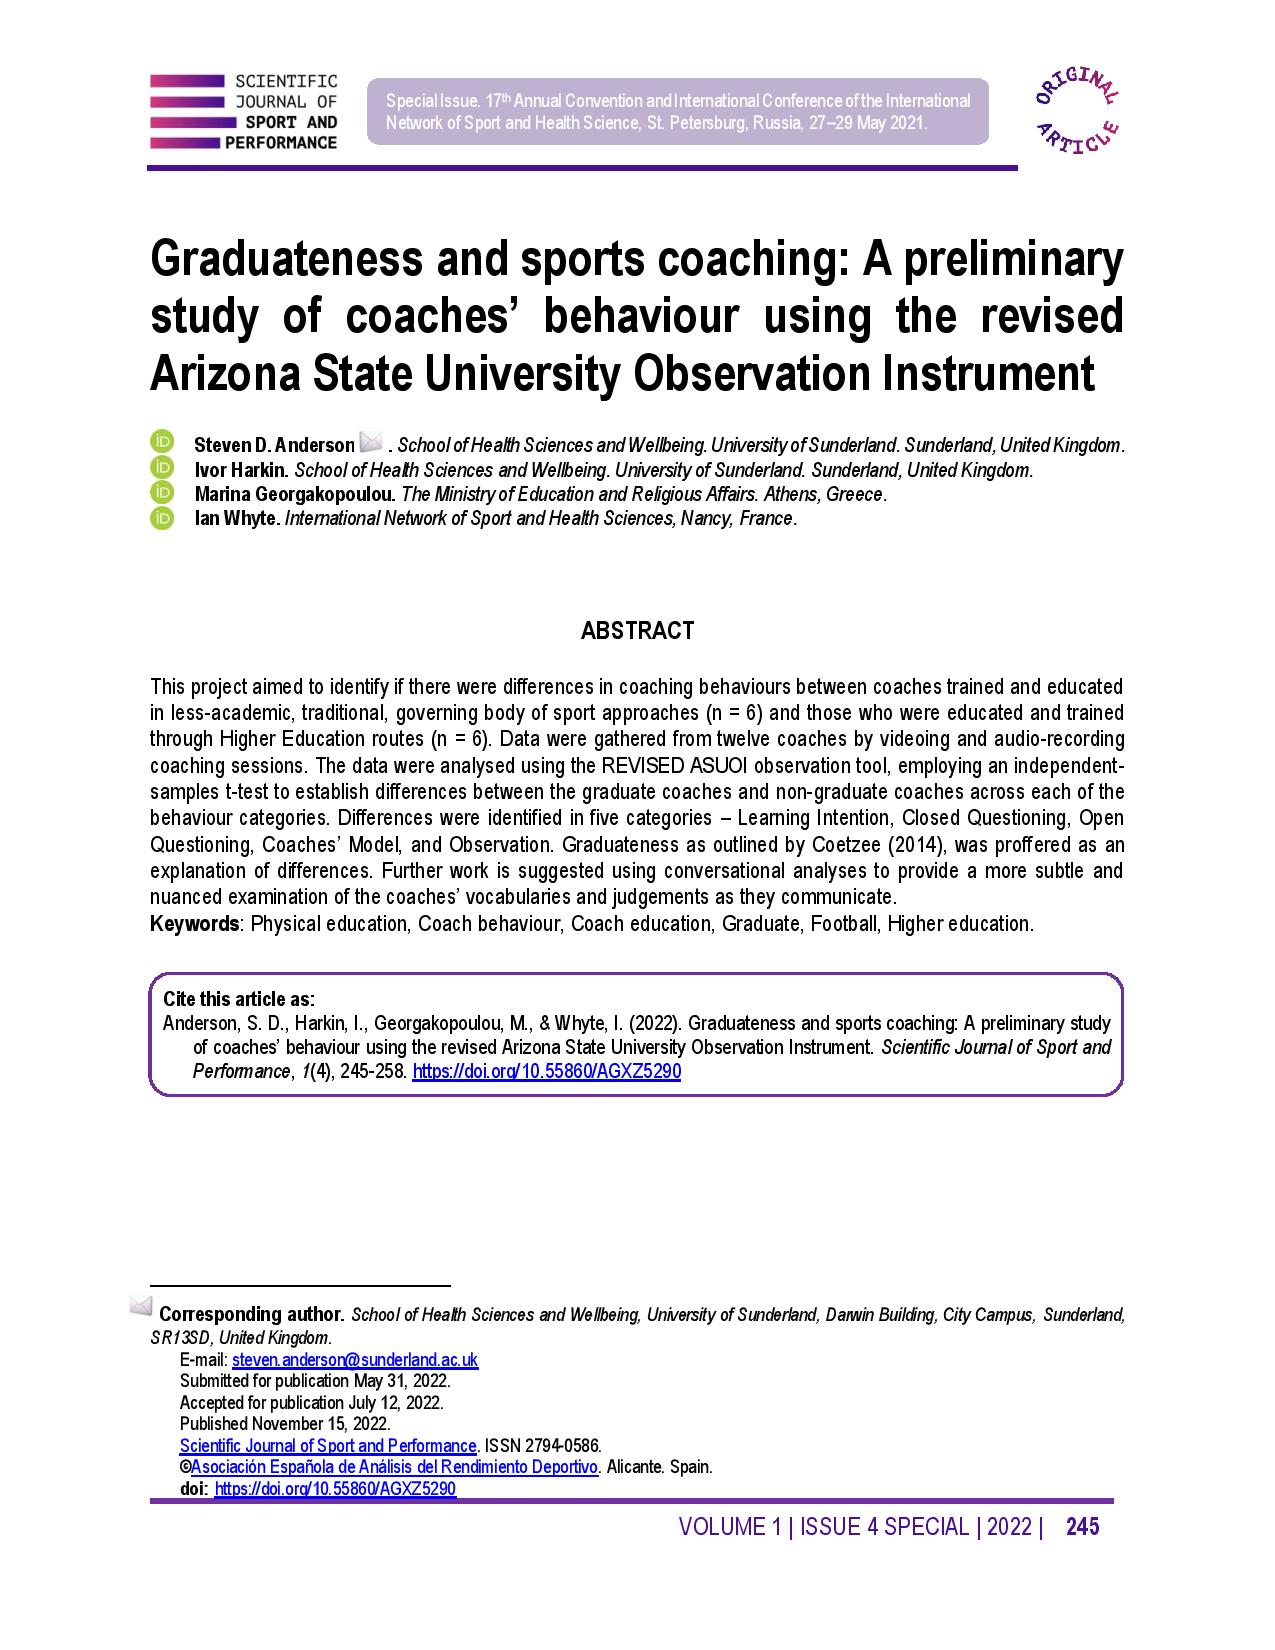 Graduateness and sports coaching: A preliminary study of coaches’ behaviour using the revised Arizona State University Observation Instrument